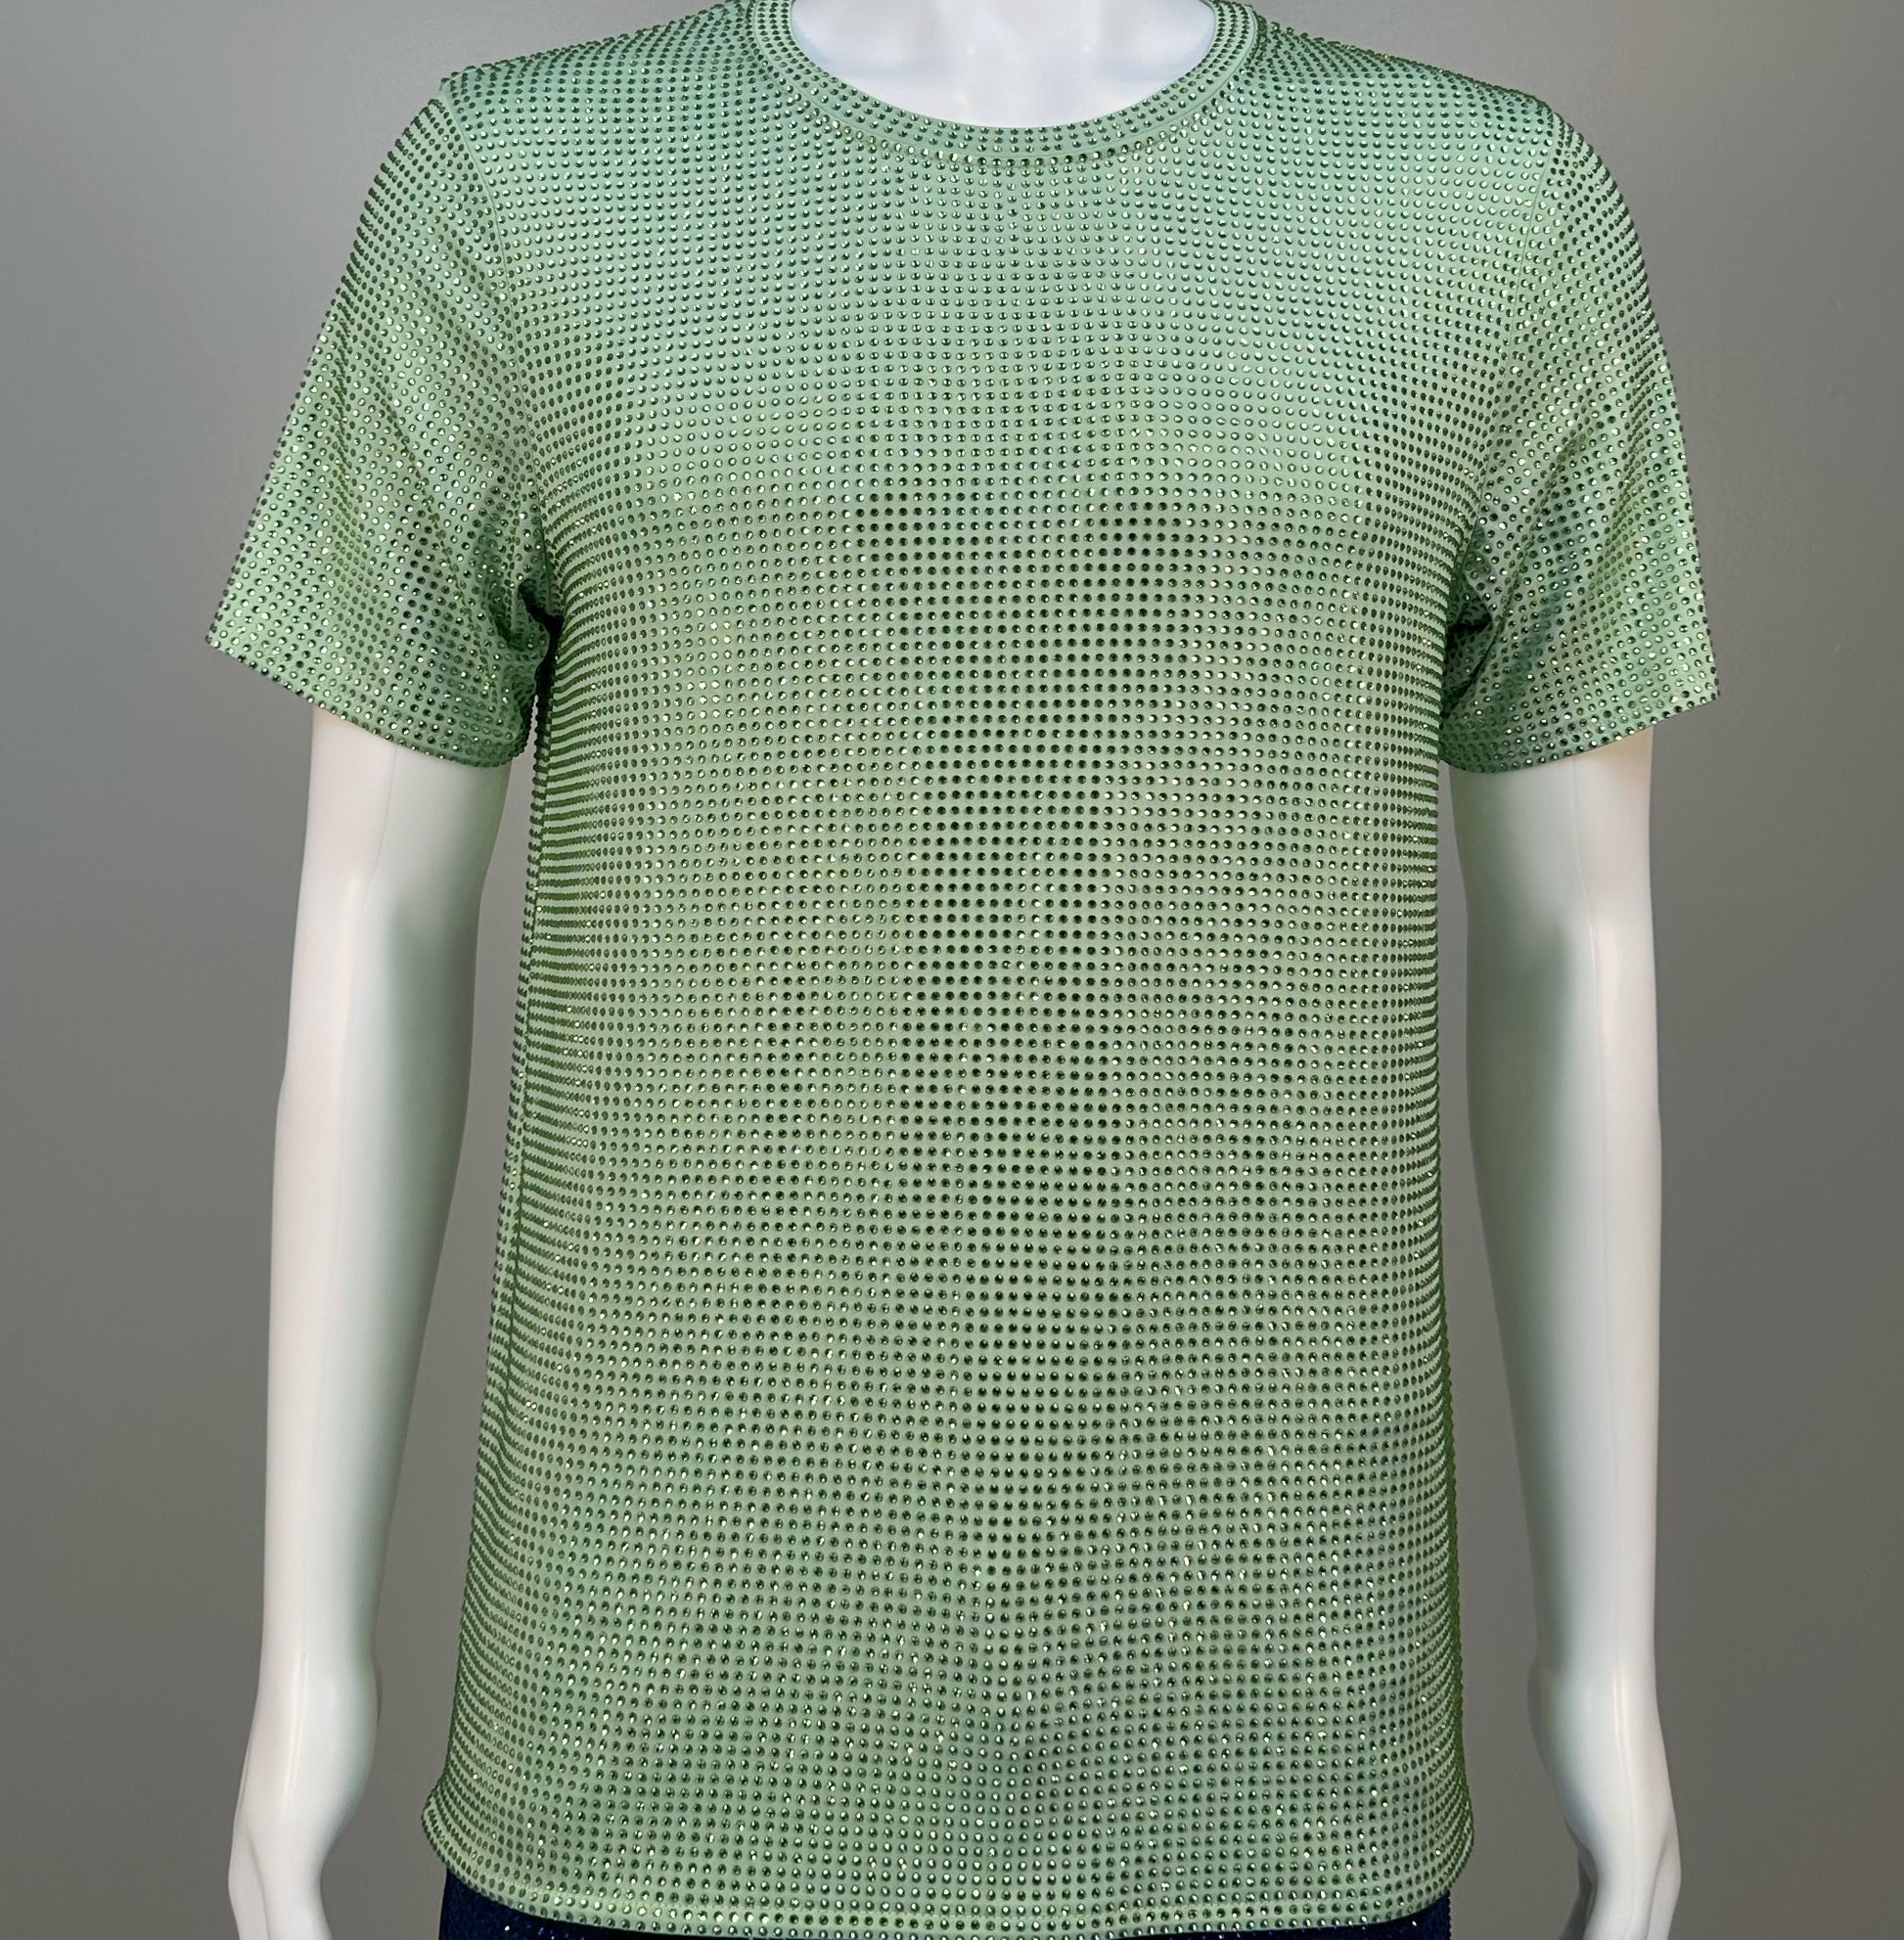 Photo of a sparkling Lt. Green Crystals on Lt. green Fabric T-shirt featuring thousands of crystal rhinestones.